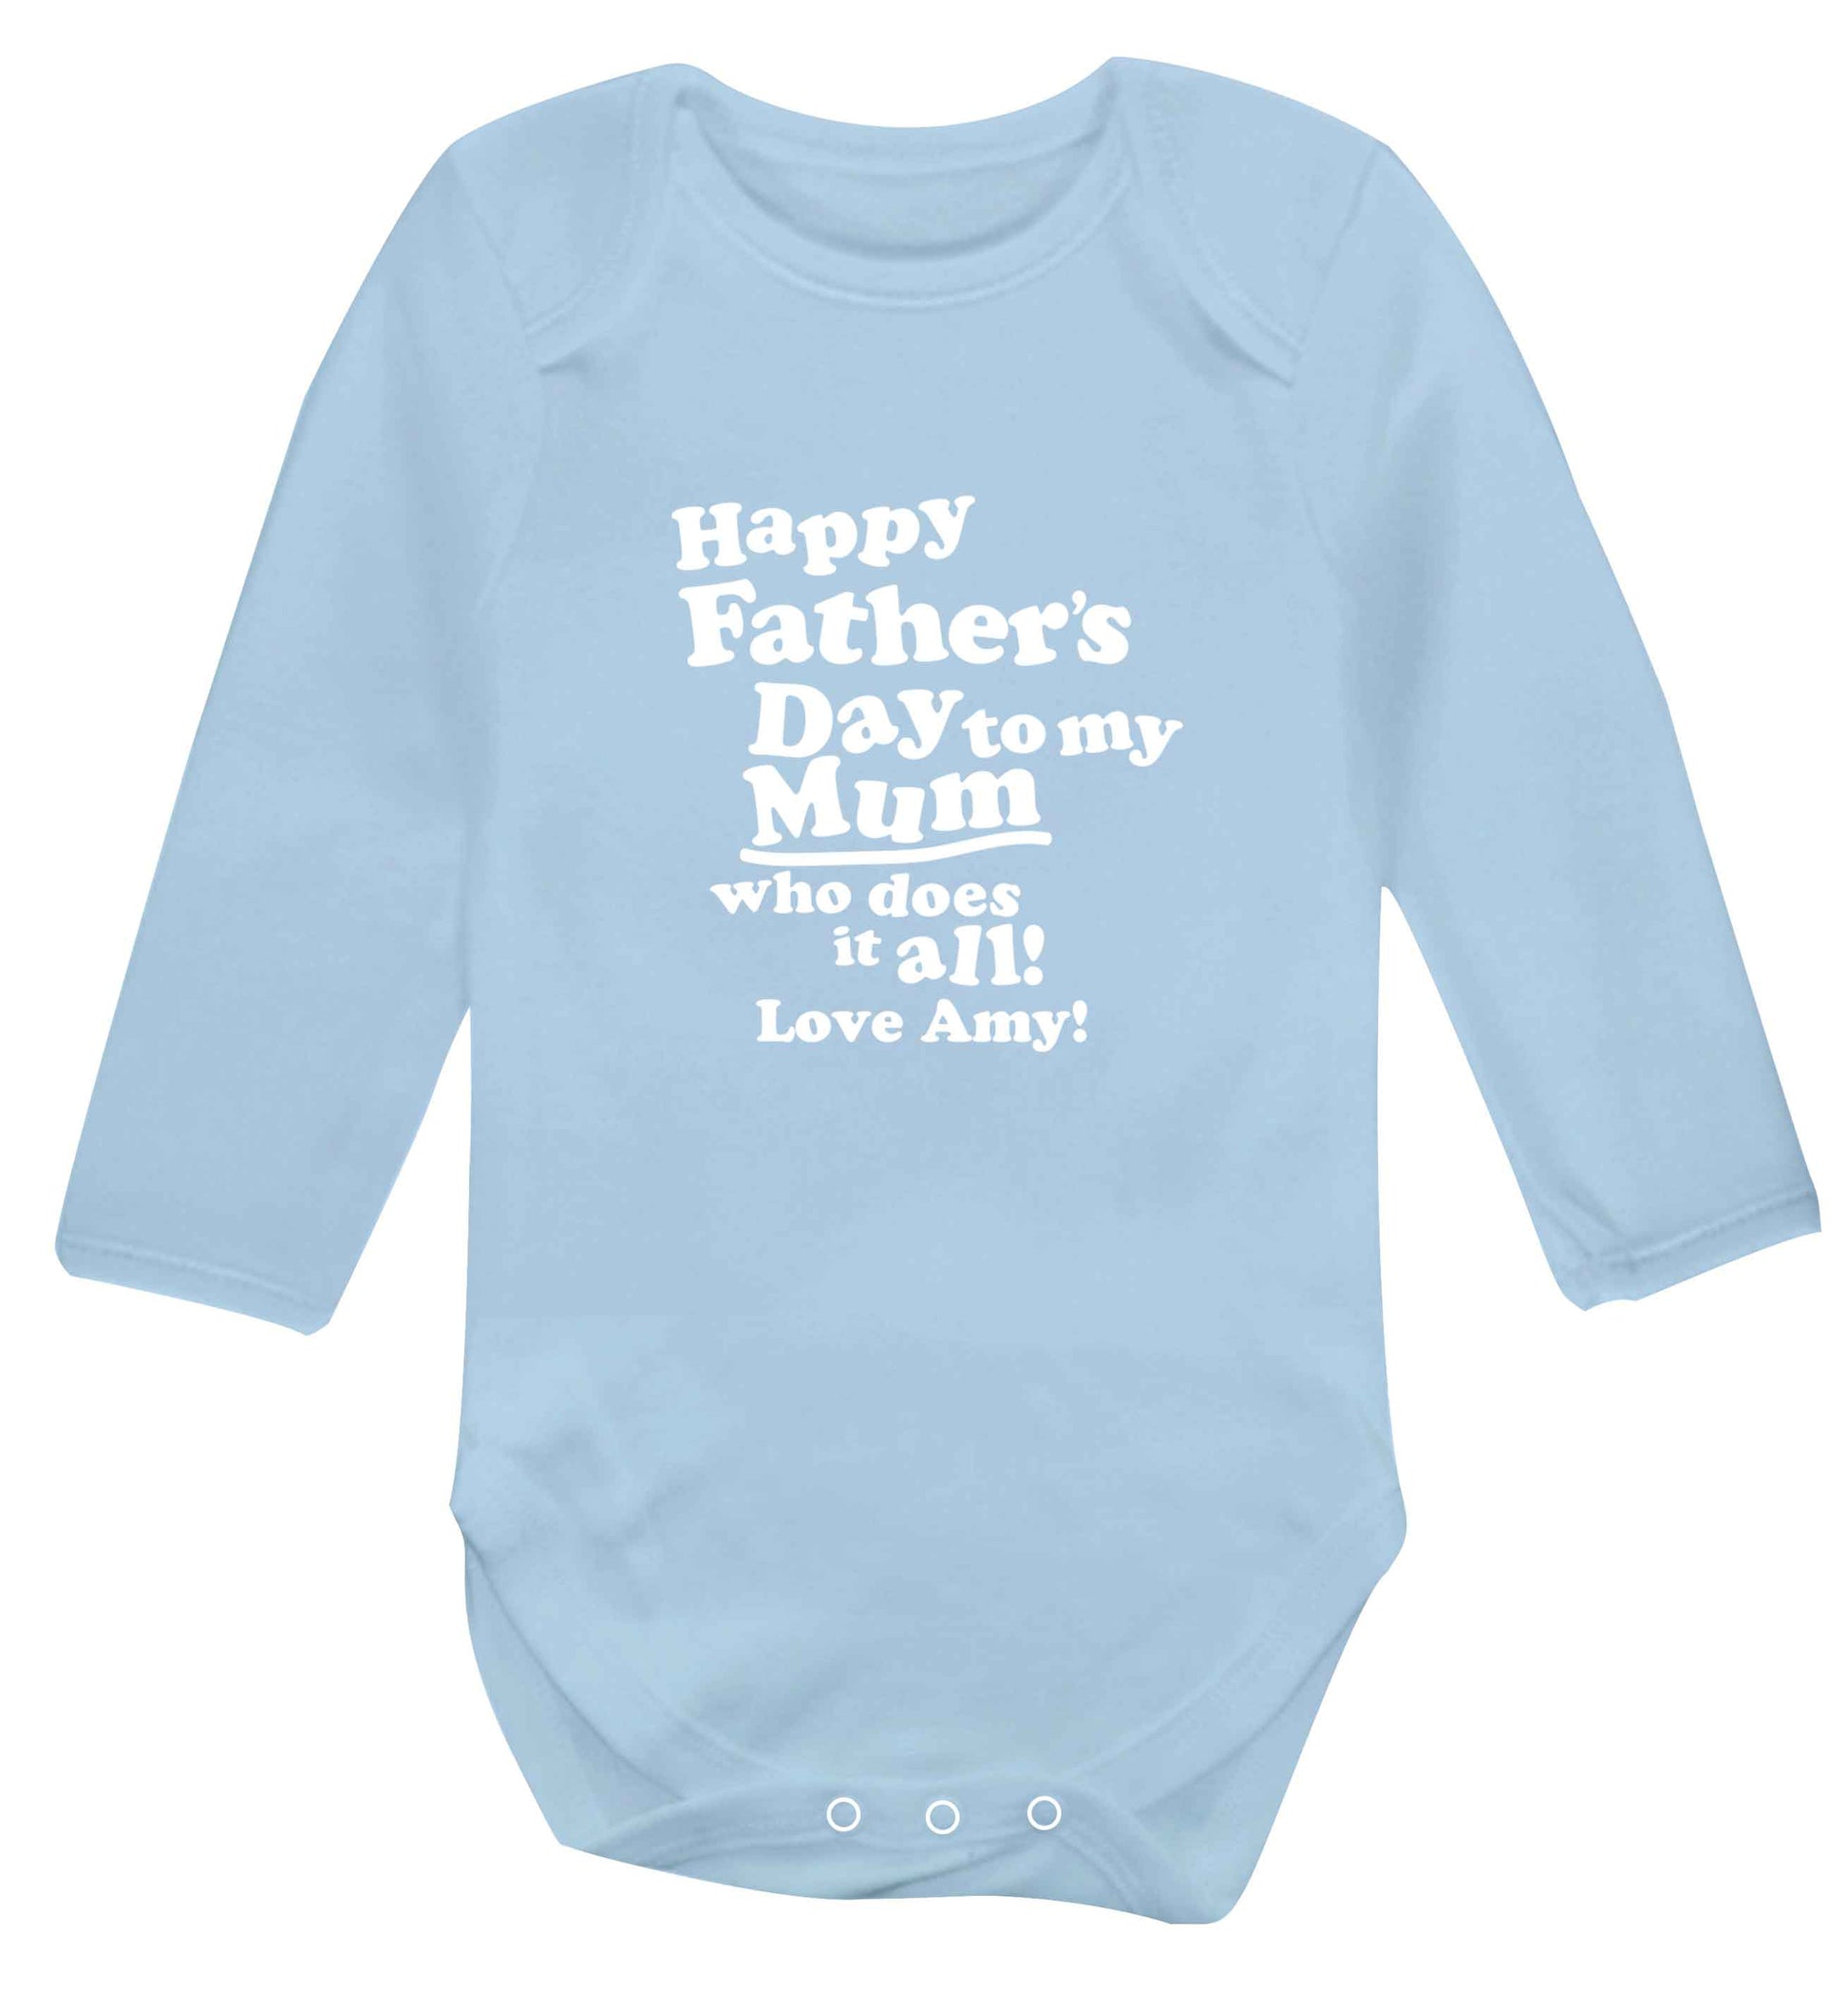 Happy Father's day to my mum who does it all baby vest long sleeved pale blue 6-12 months